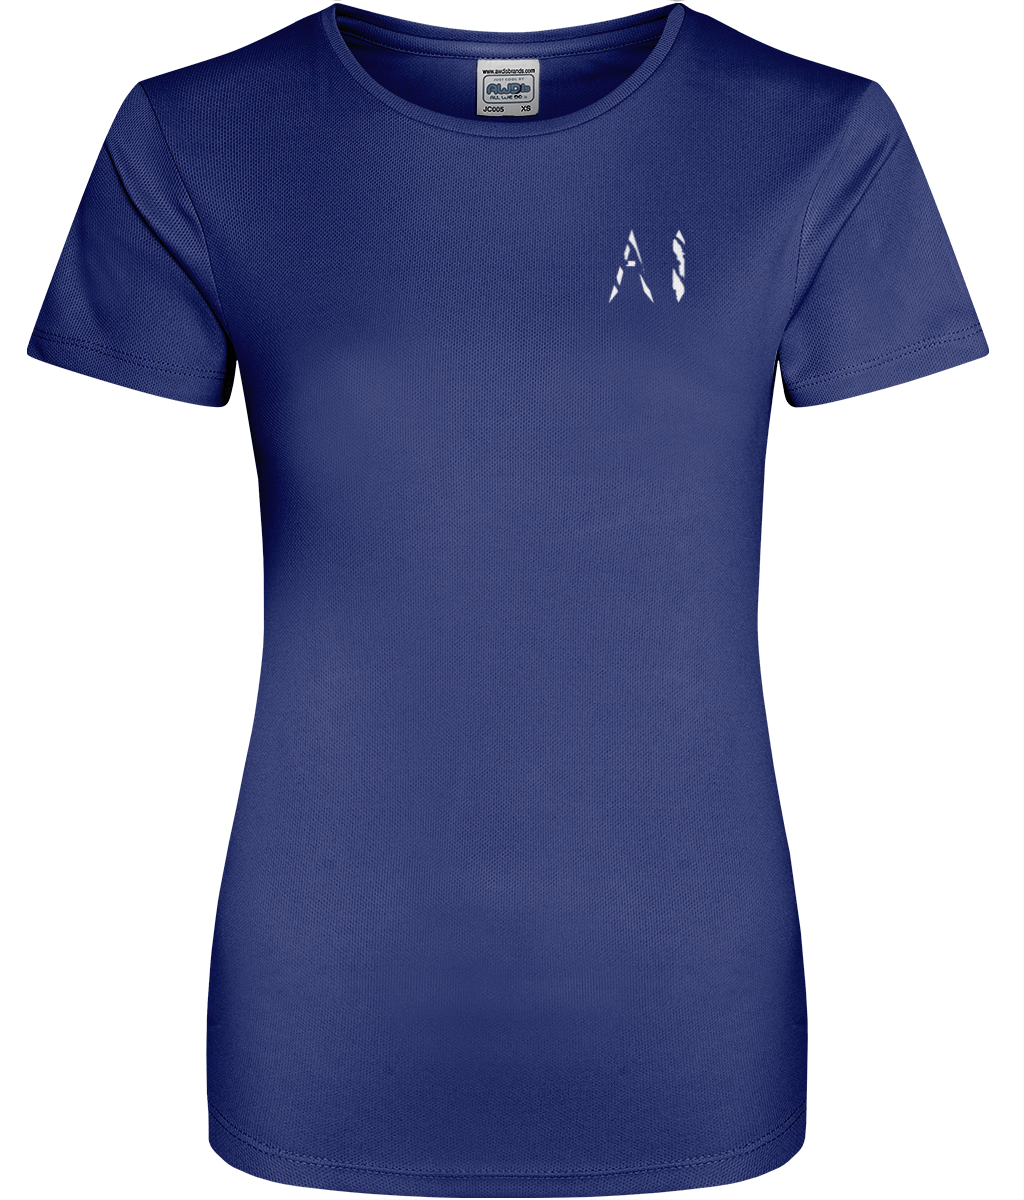 Womens Athletic Sports Shirt with White AI logo on left breast